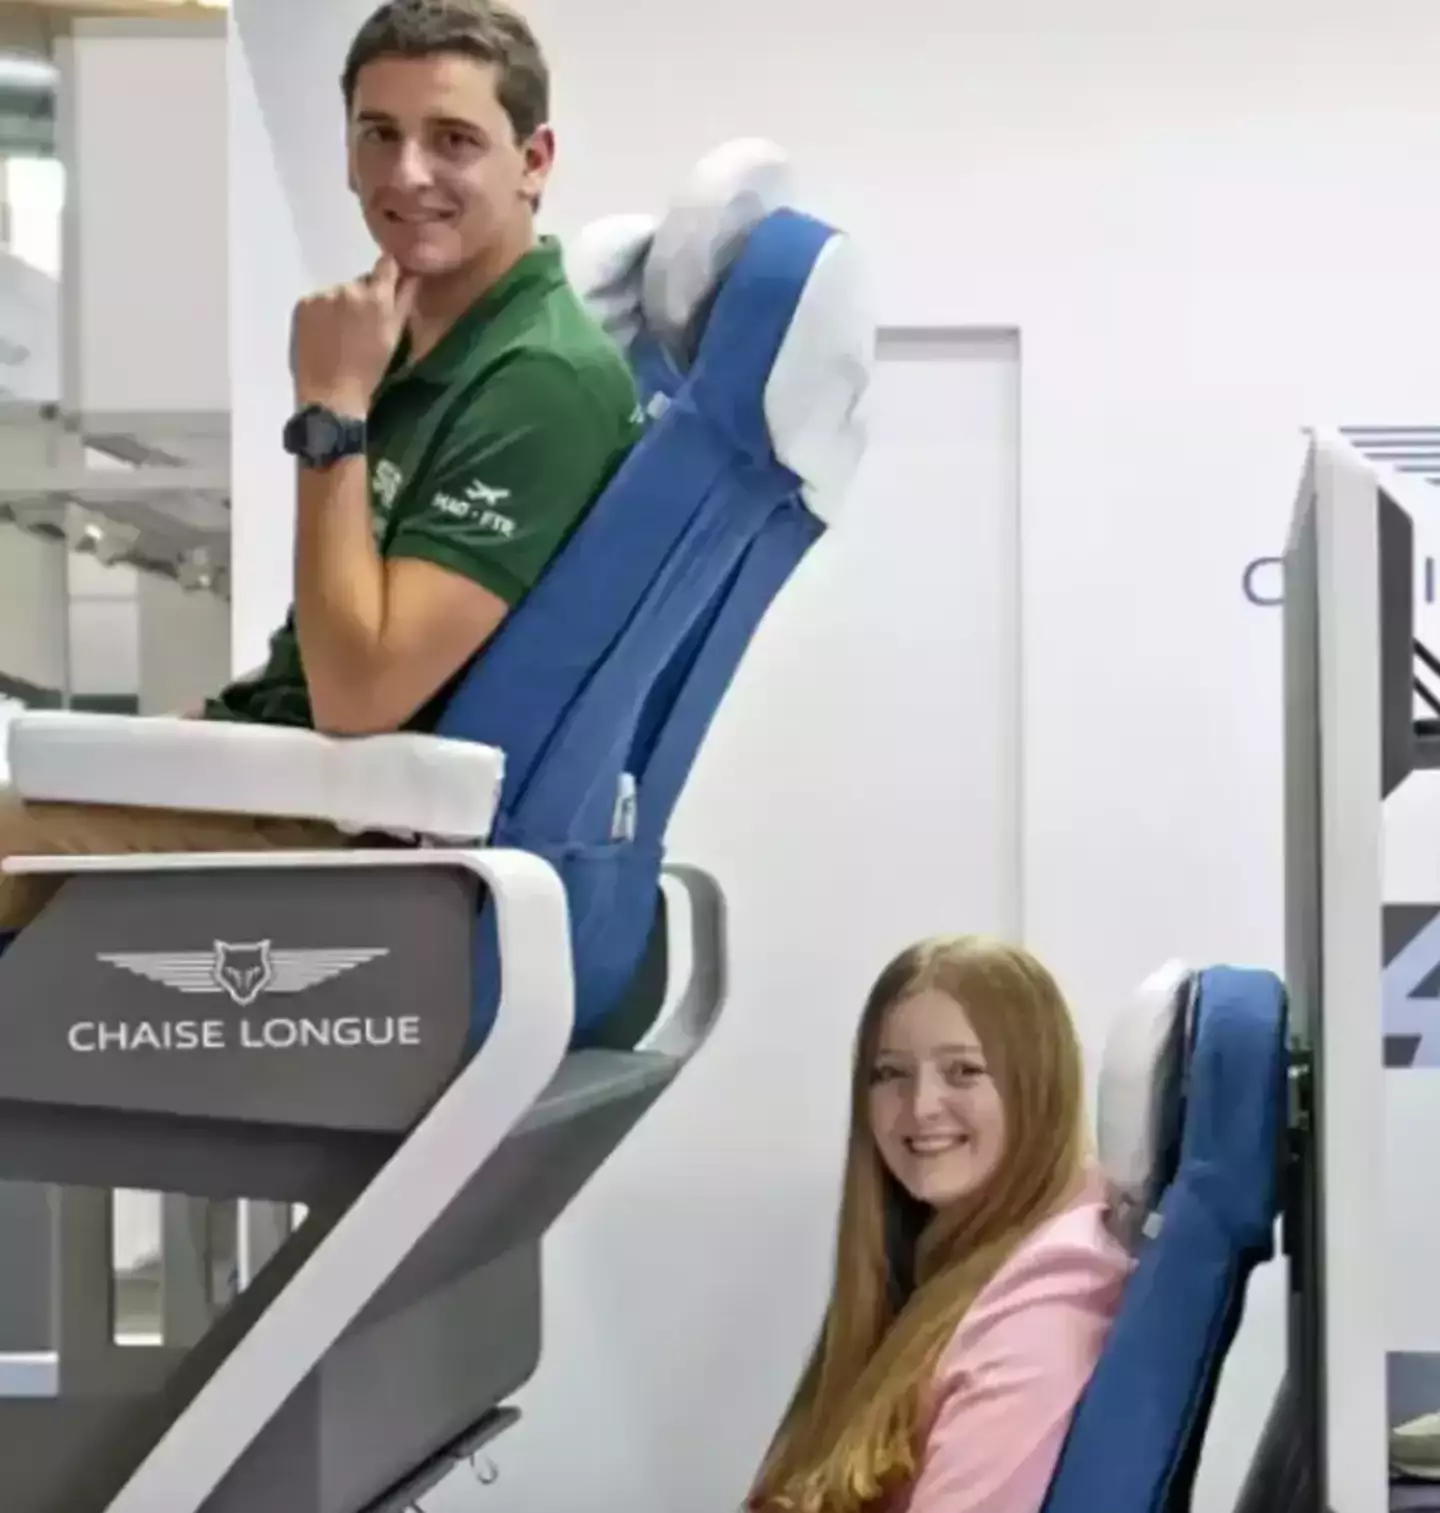 One man's double-decker plane seat design was met with backlash online, despite attracting commercial interest. (1OFF Media)